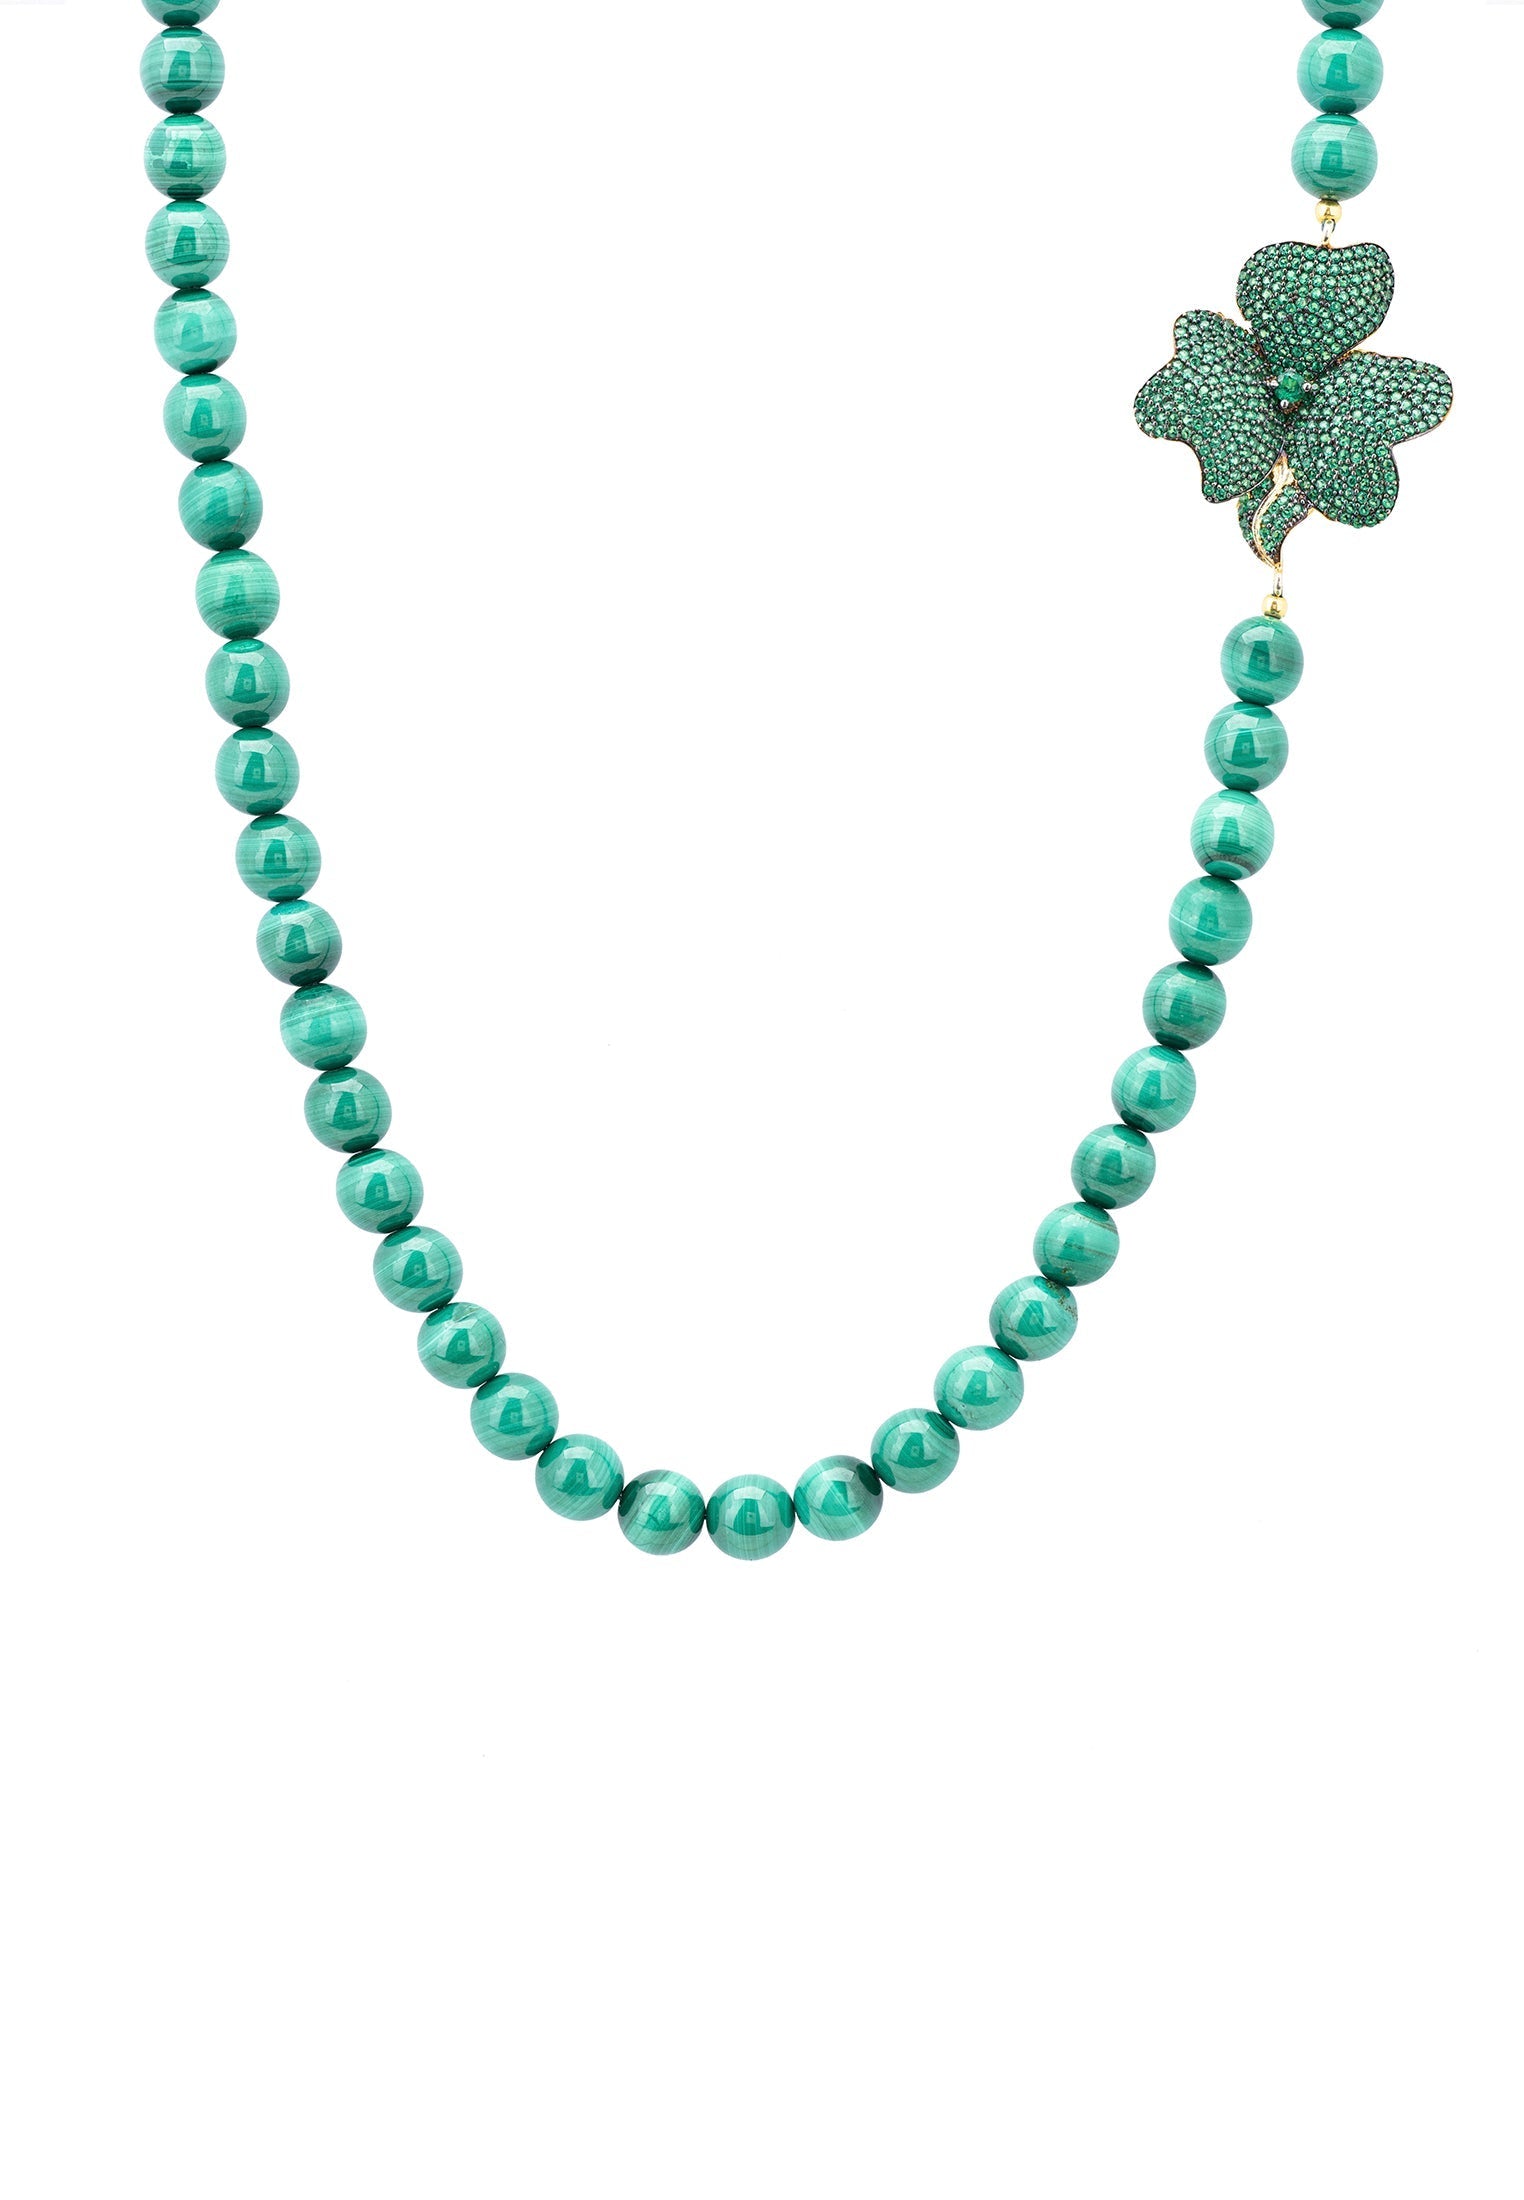 Emerald Gemstone Flower Necklace in Gold - Perfect for Special Occasions Bijou Her